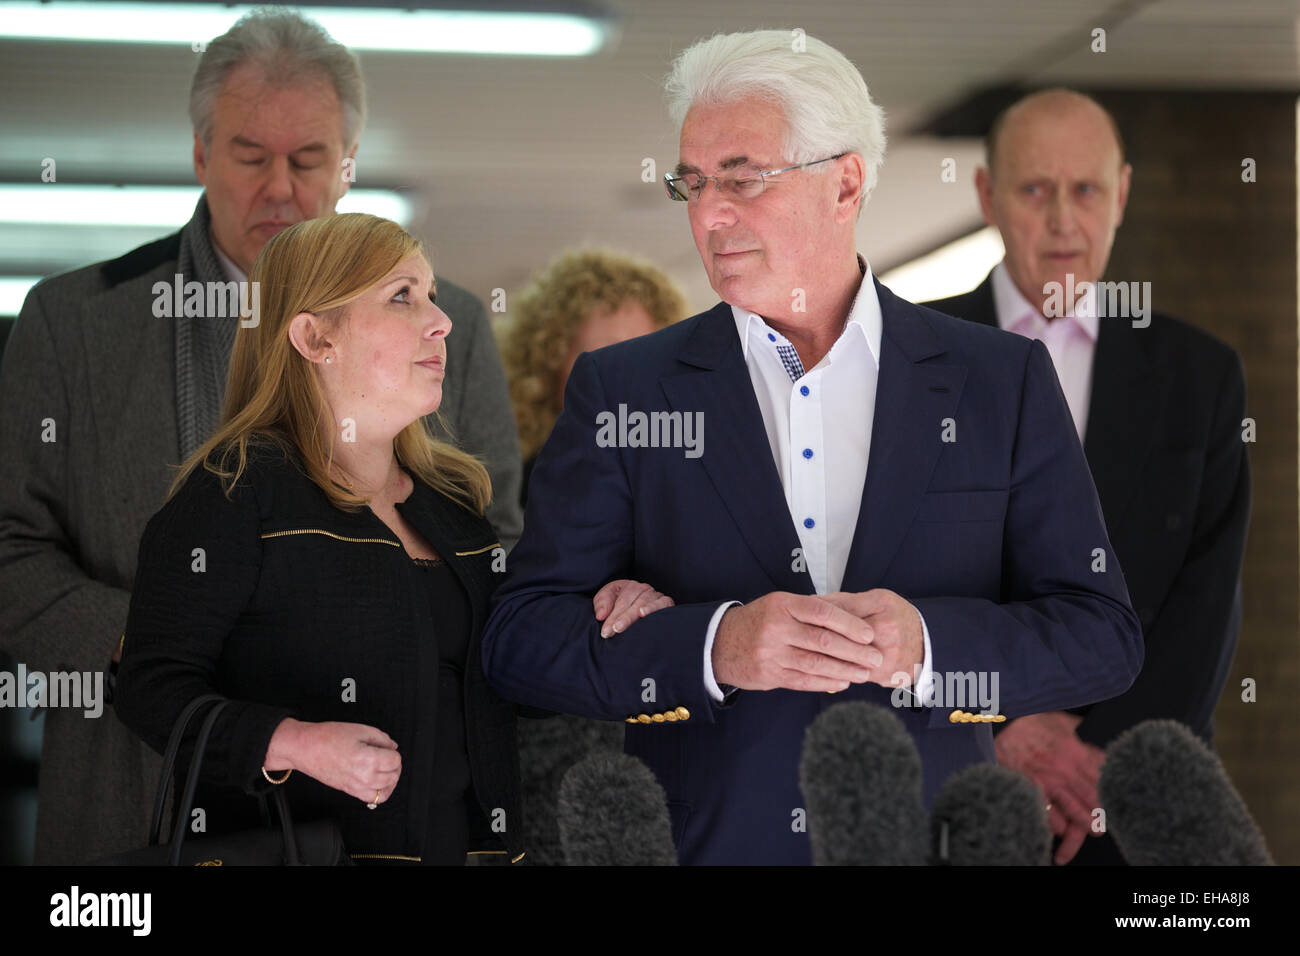 UNITED KINGDOM, London : Publicist Max Clifford arrives at Southwark Crown Court in central London, The jury has retired to consider the 11 charges of indecent assault against Mr Clifford on April 23, 2014. Stock Photo